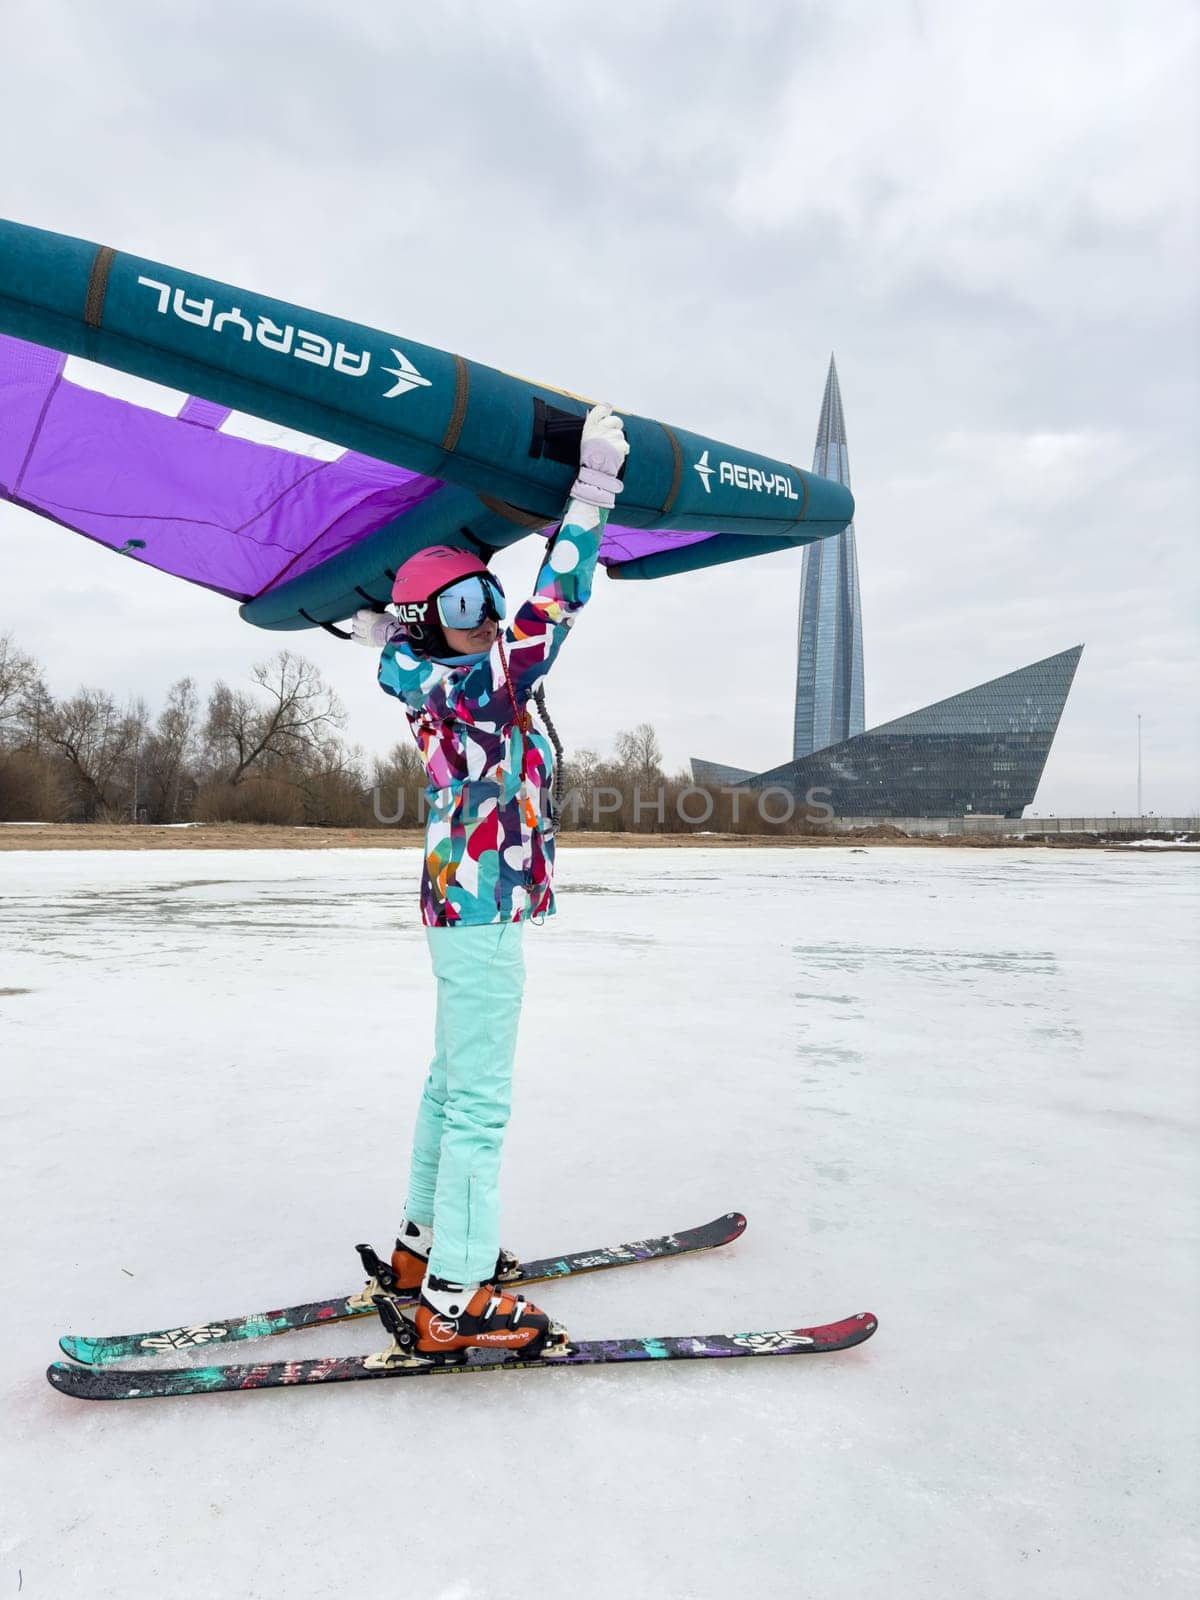 Russia, St.Petersburg, 14 March 2024: A girl in bright colored ski gear is ready to ski on ice with an air wing at cloudy weather, the Lakhta Center skyscraper in the background, helmet and glasses. High quality photo